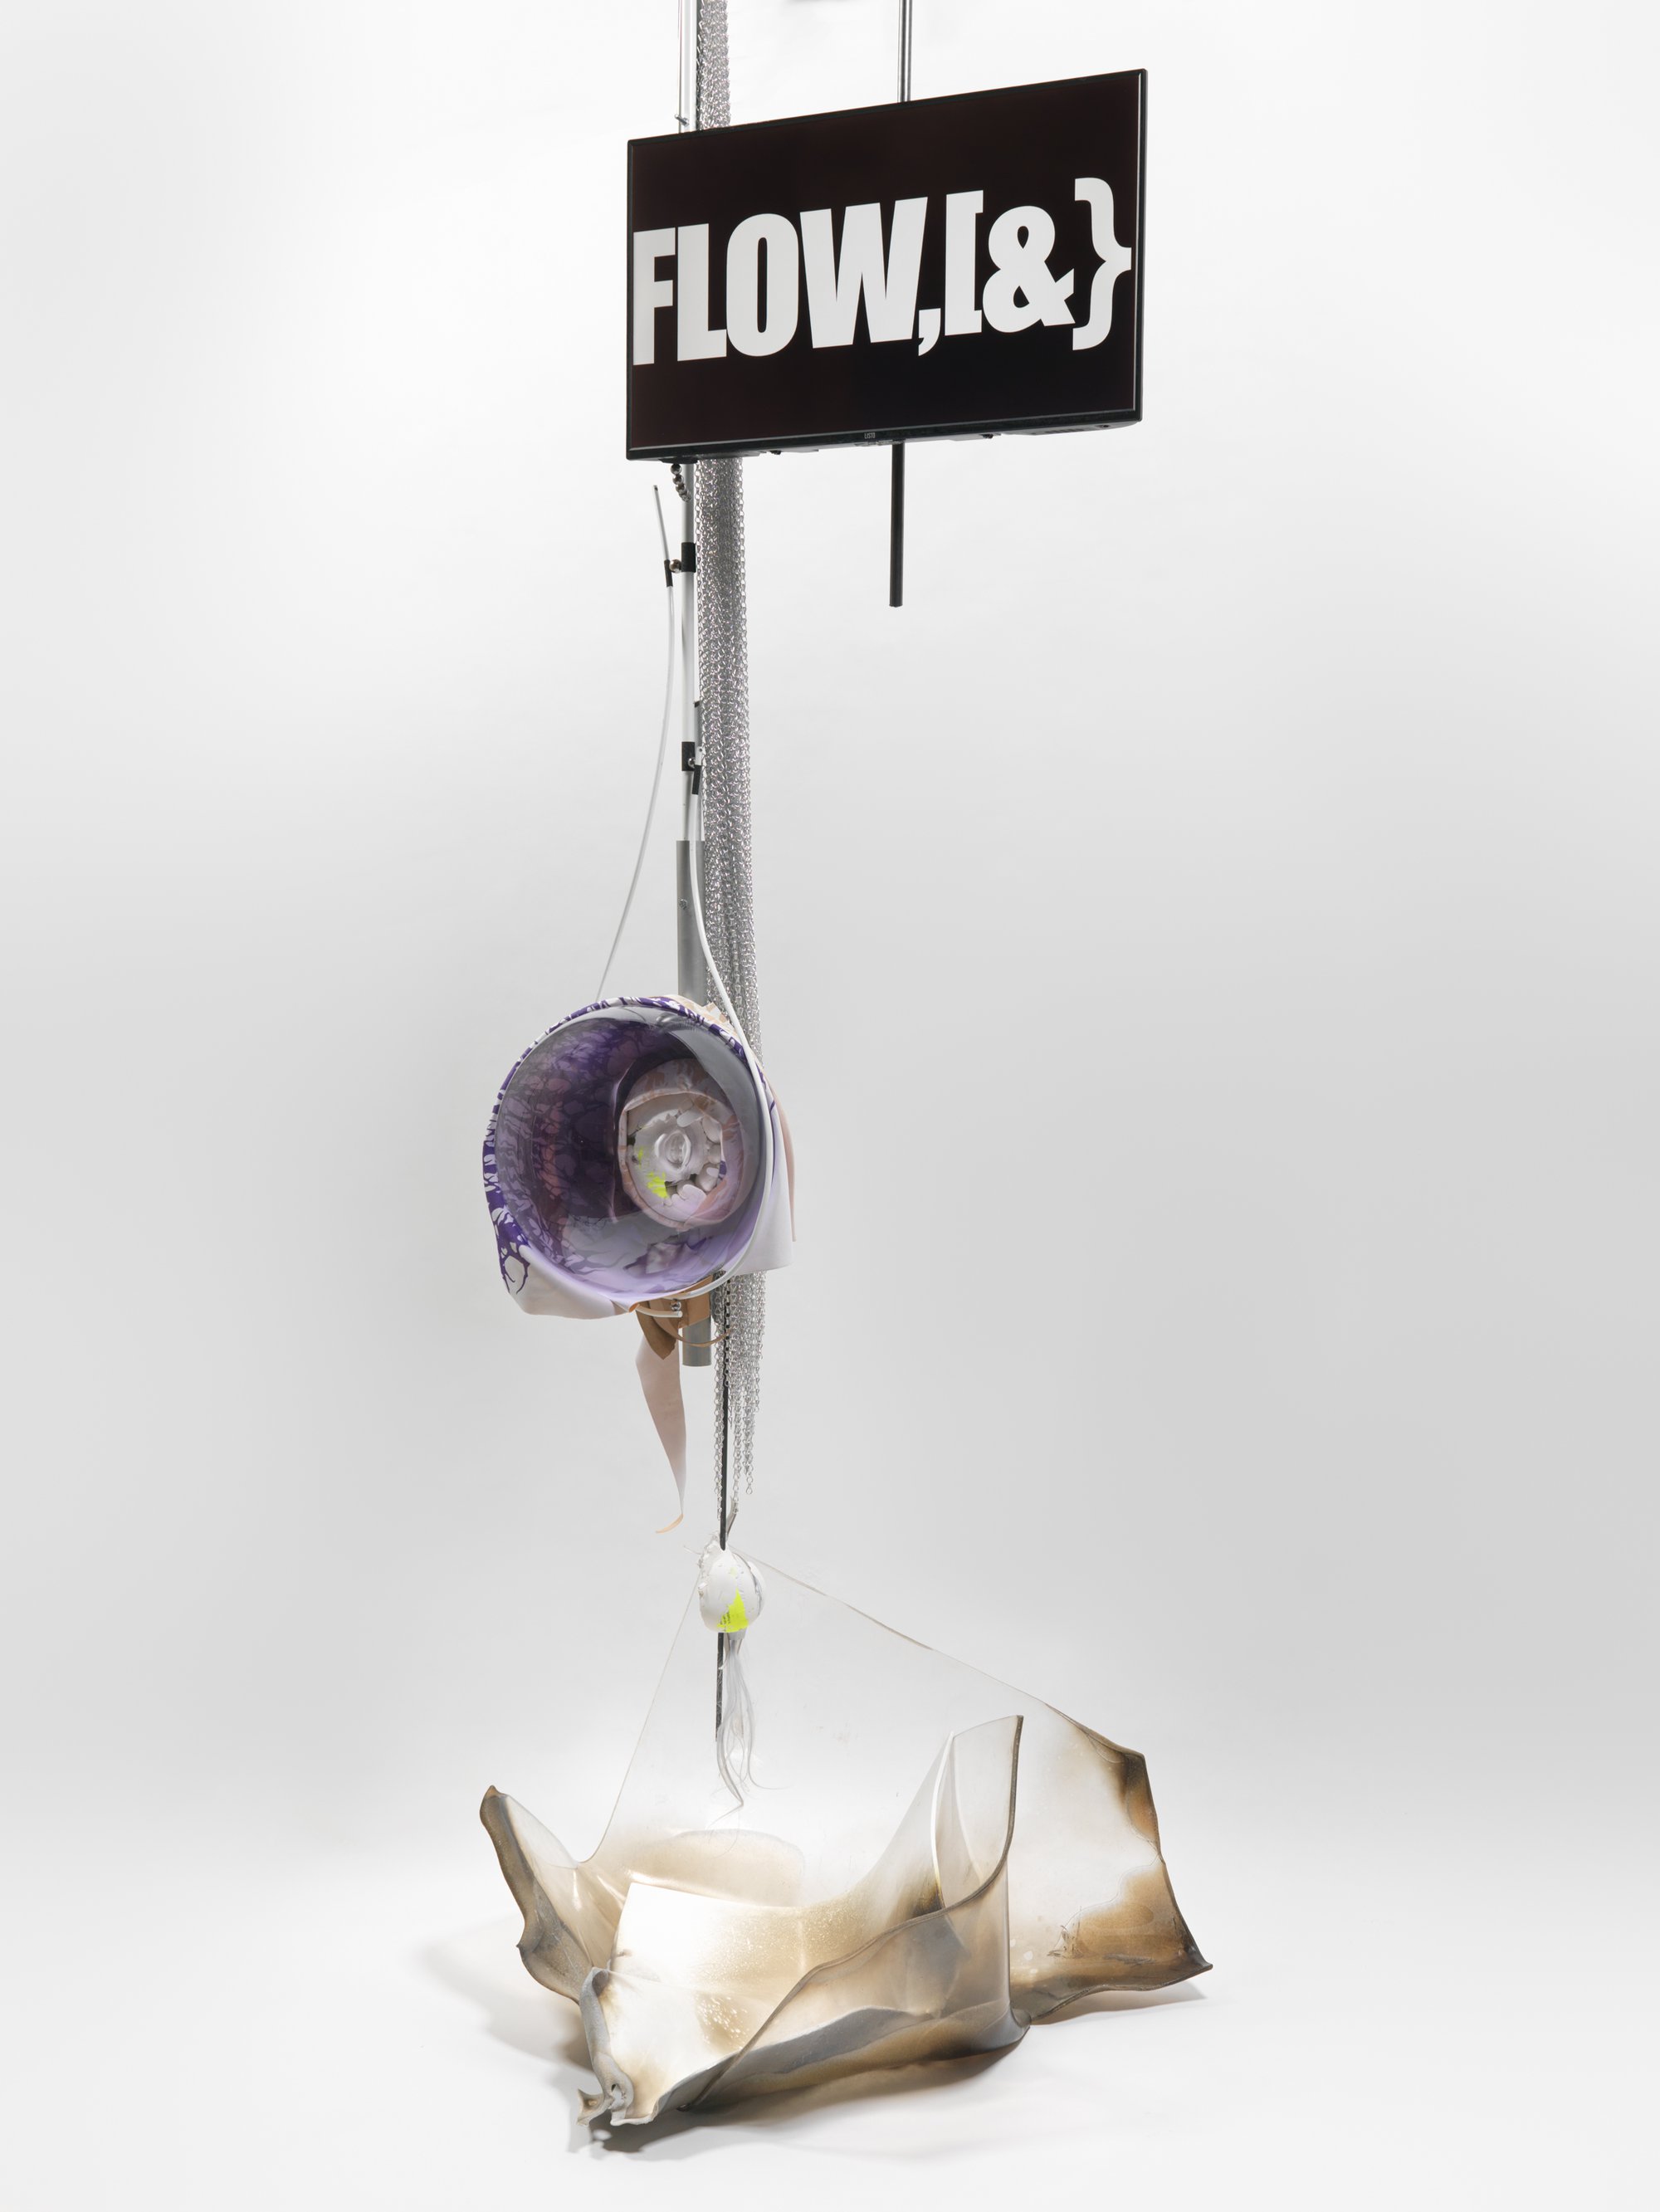 David Douard, 0’Thee LIL (PUMP) 1, blown glass, plaster, metal, aluminium, leather, fabric, paper, plexiglass, water pump, chains, screen, synthetic hair, magnets, industrial paint, 375 x 130 x 100 cm (147 5/8 x 51 1/8 x 39 3/8 in), 2021